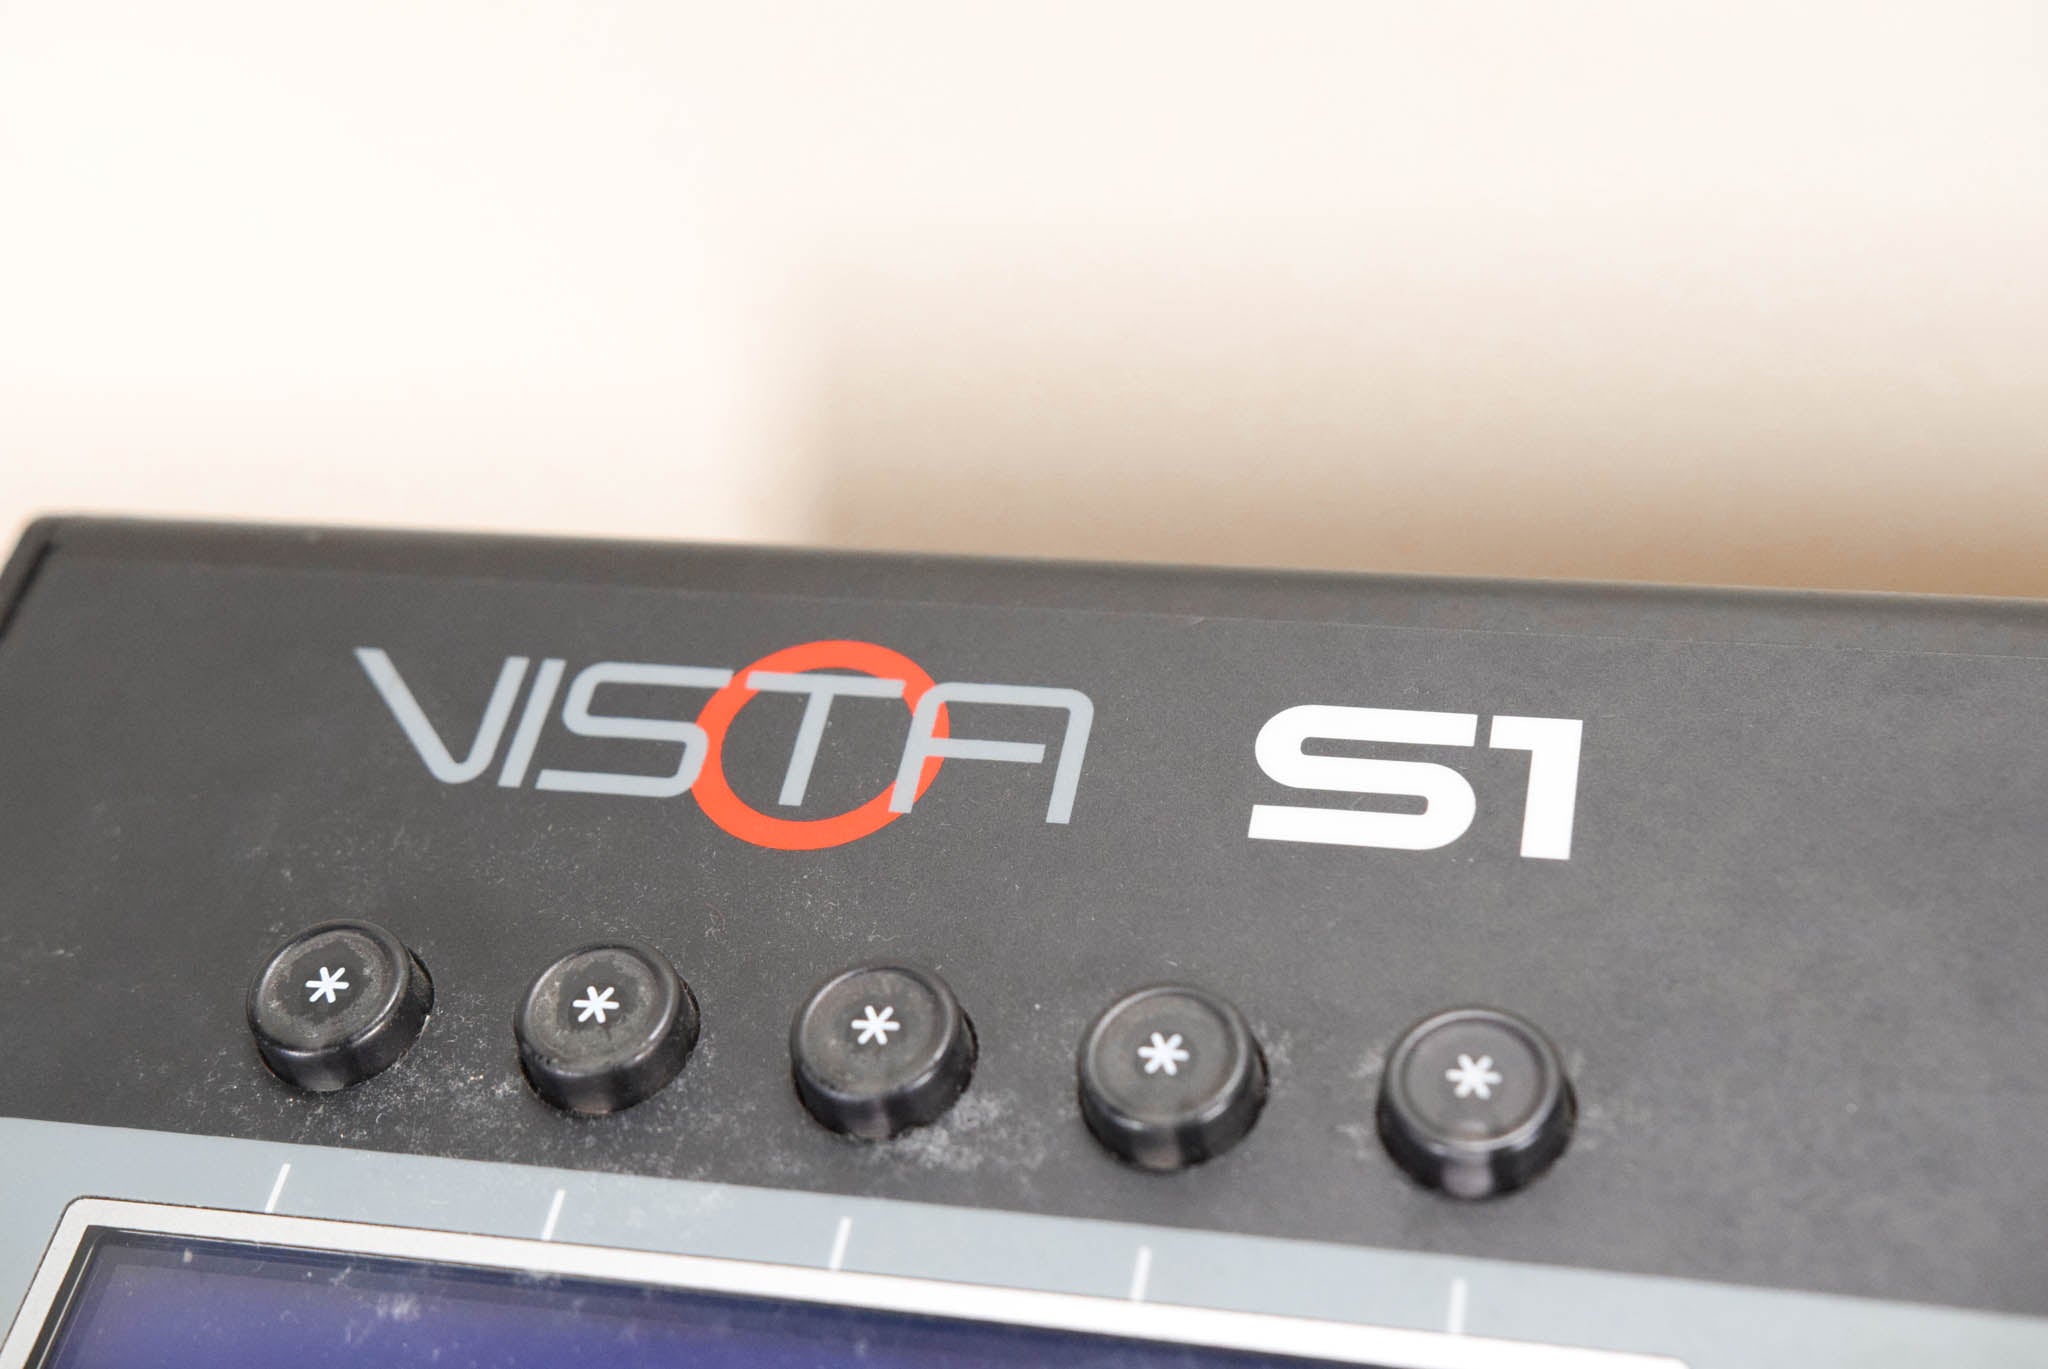 Jands Vista S1 Lighting Console Control Surface